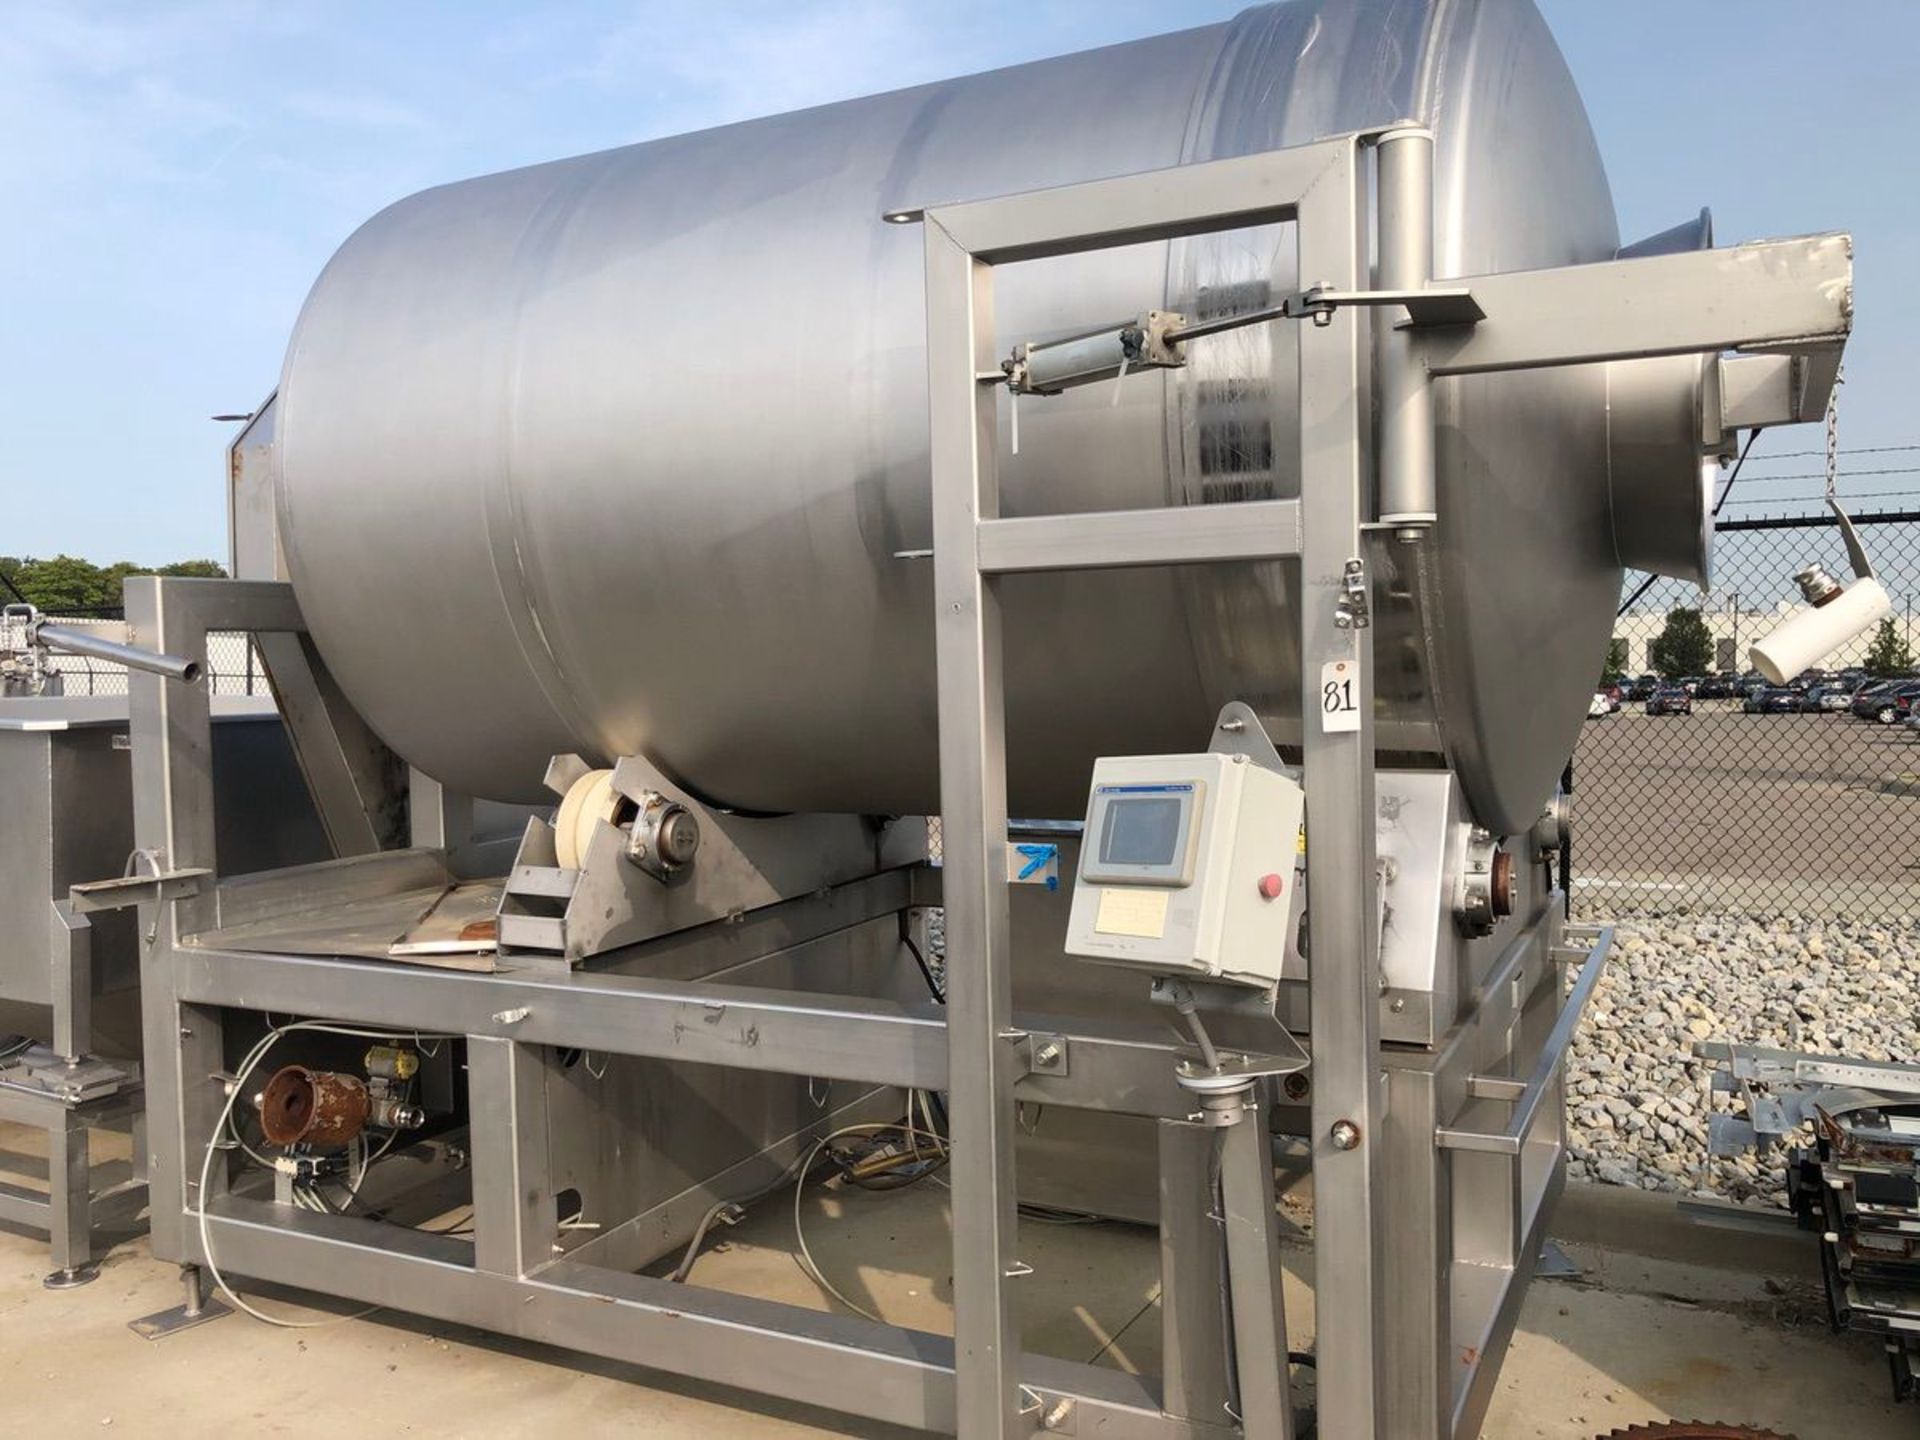 FPEC 6,000 LB Stainless Steel Vacuum Tumbler, S/N 6679 (Tagged as 81) | Rig Fee: $750 See Full Desc - Image 2 of 5